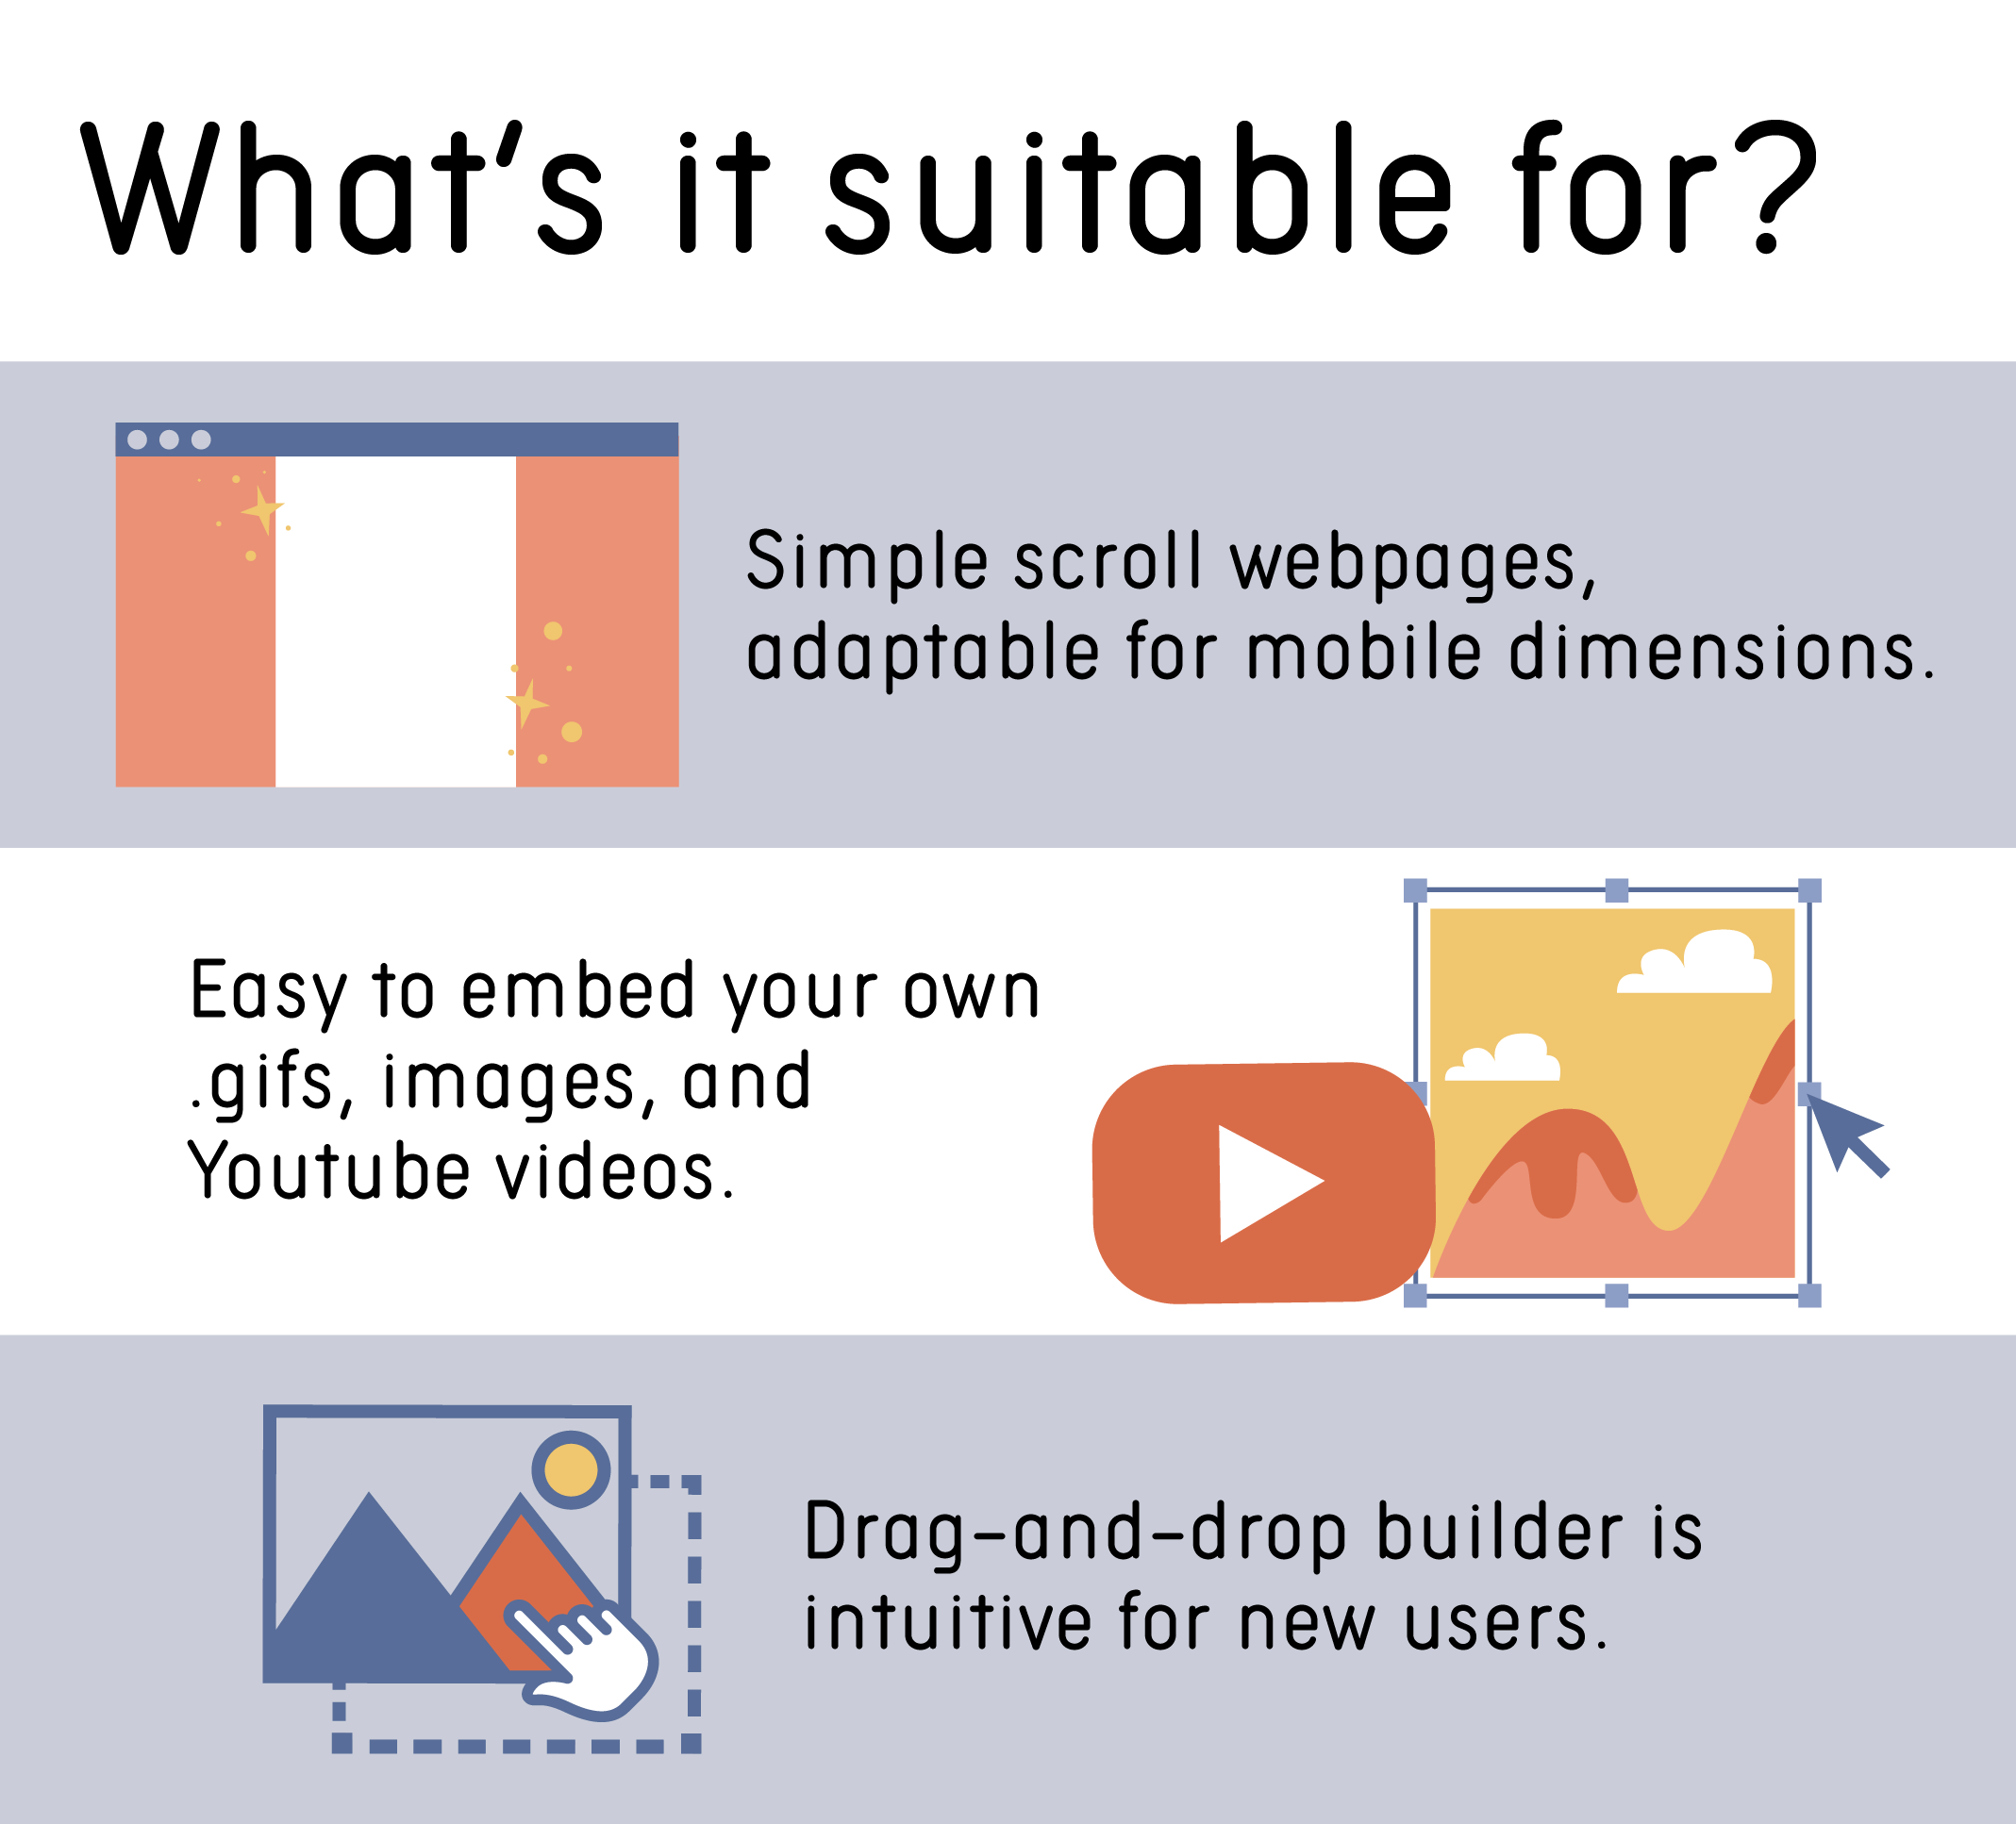 Simple scroll webpages, adaptable for mobile dimensions. Easy to embed your own .gifs, images, and YouTube videos. Drag-and-drop builder is intuitive for new users.